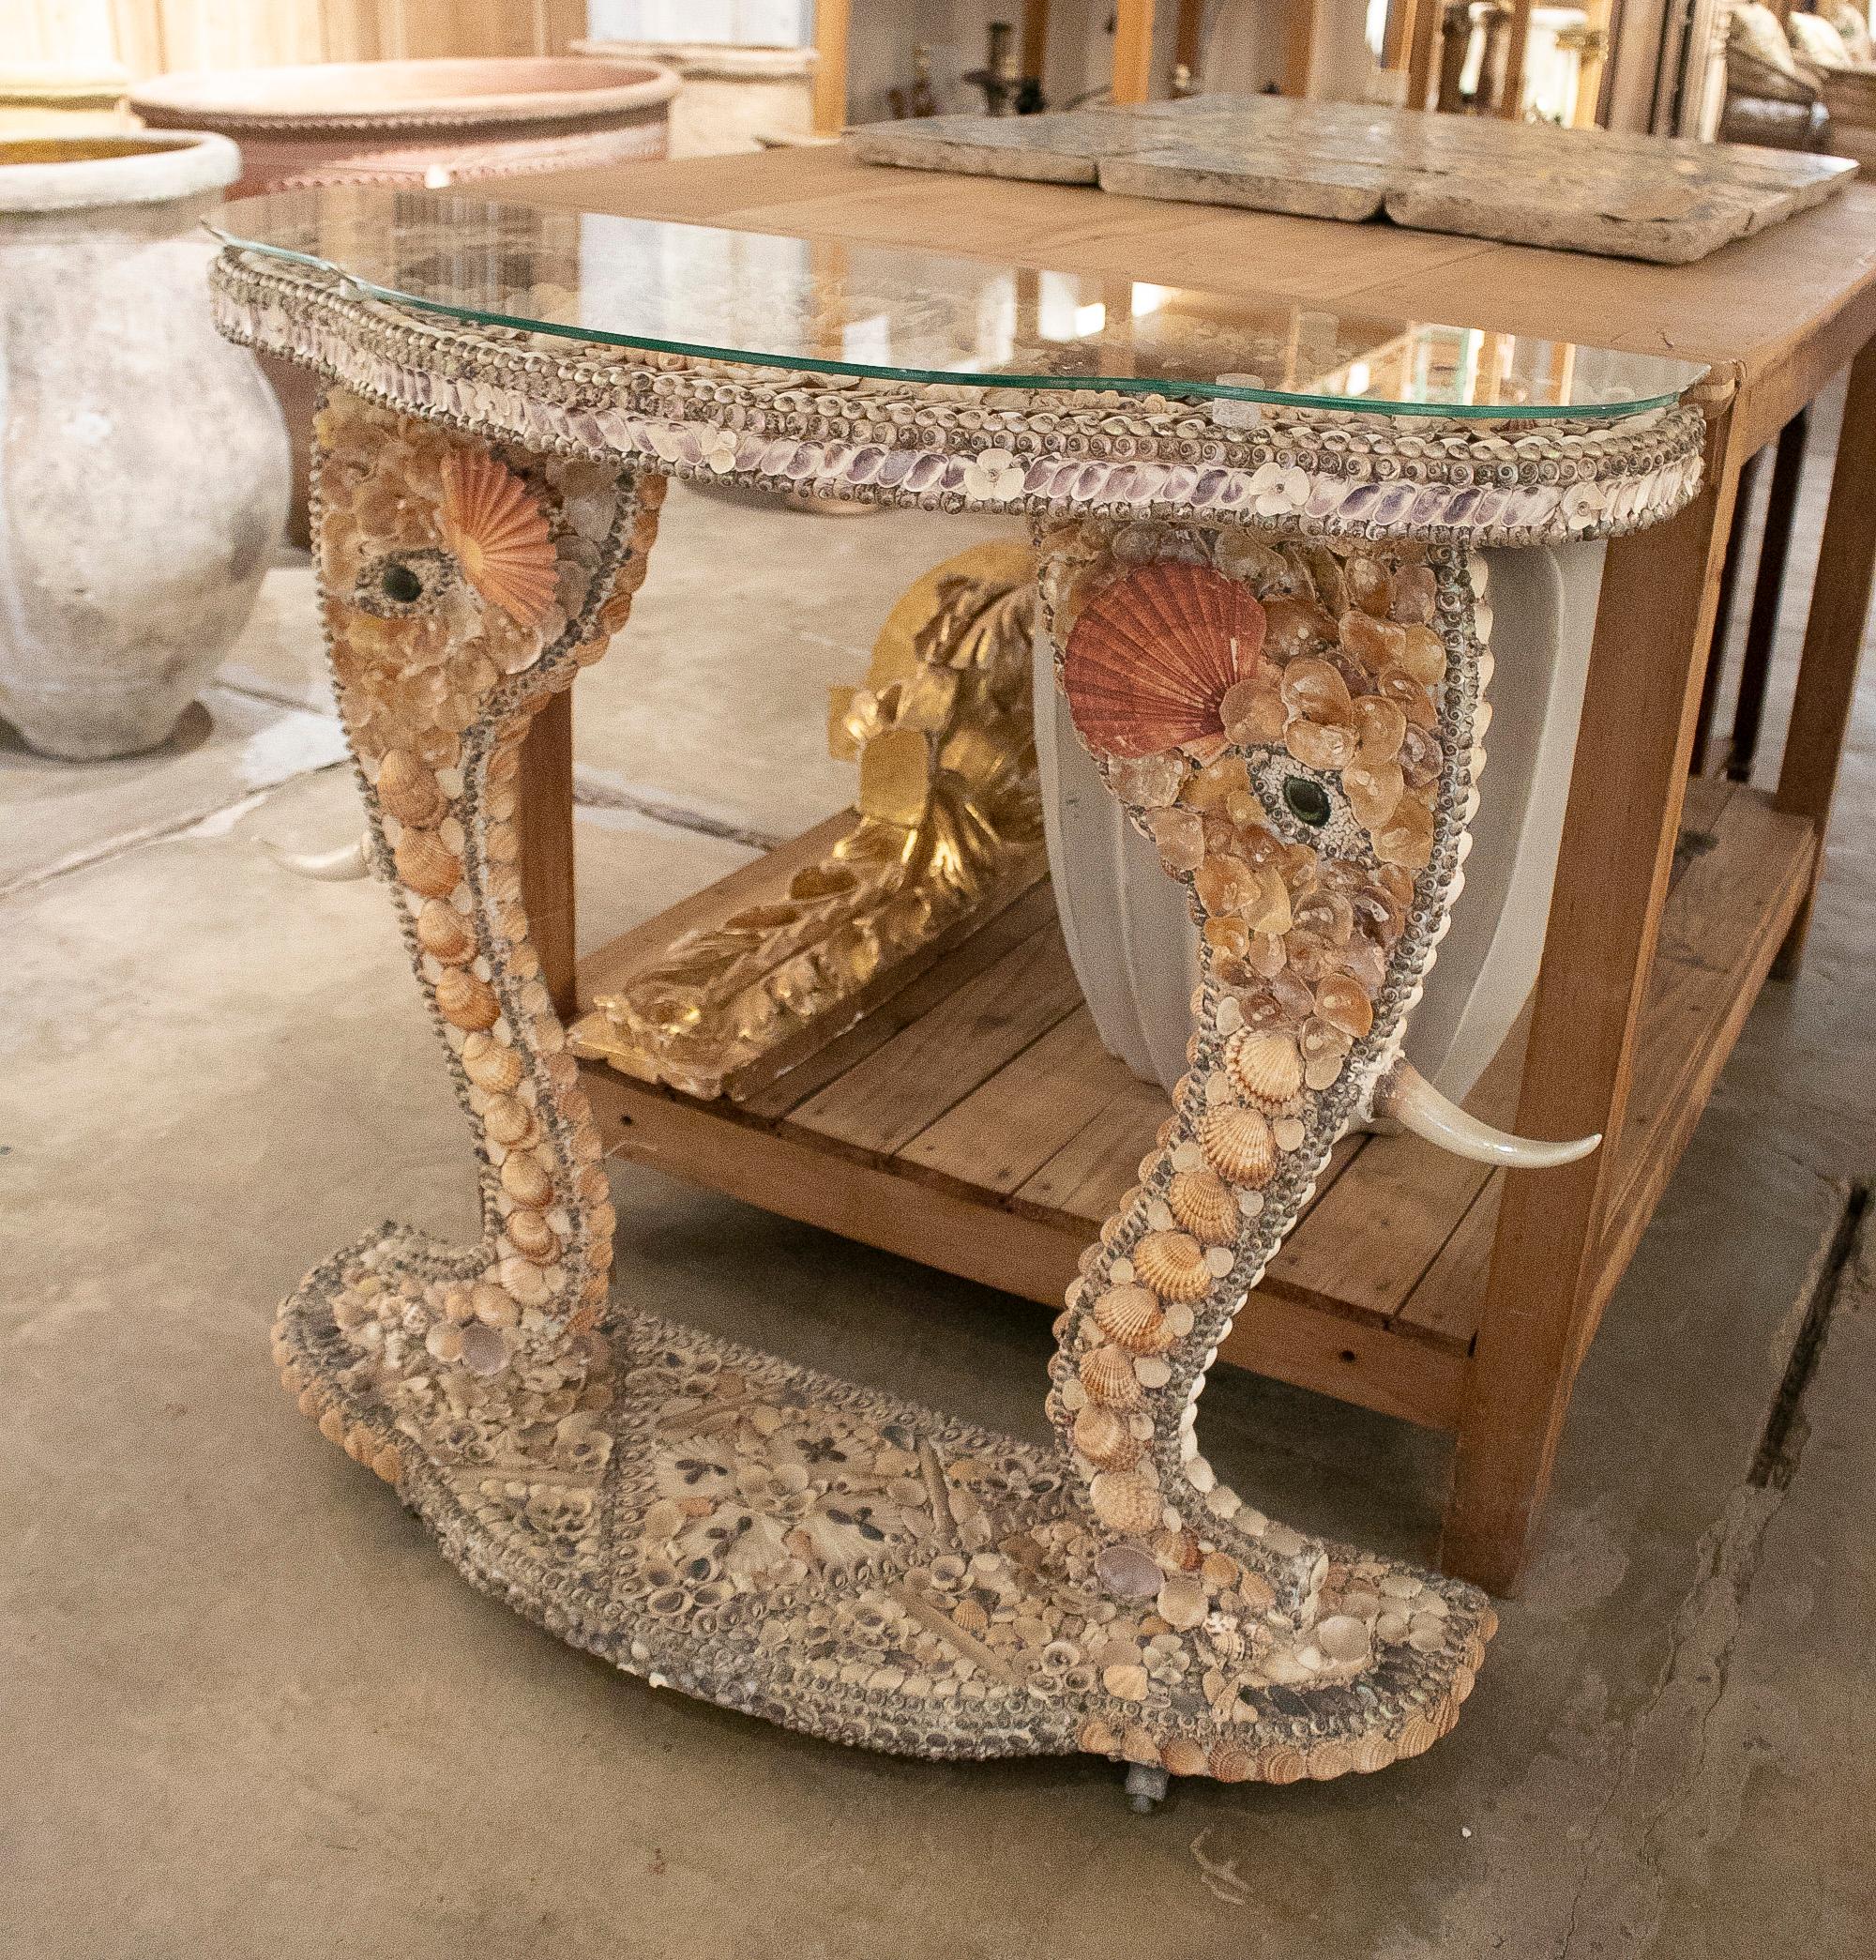 Vintage 1970s French conch studded console table with elephant head shaped head and glass top.